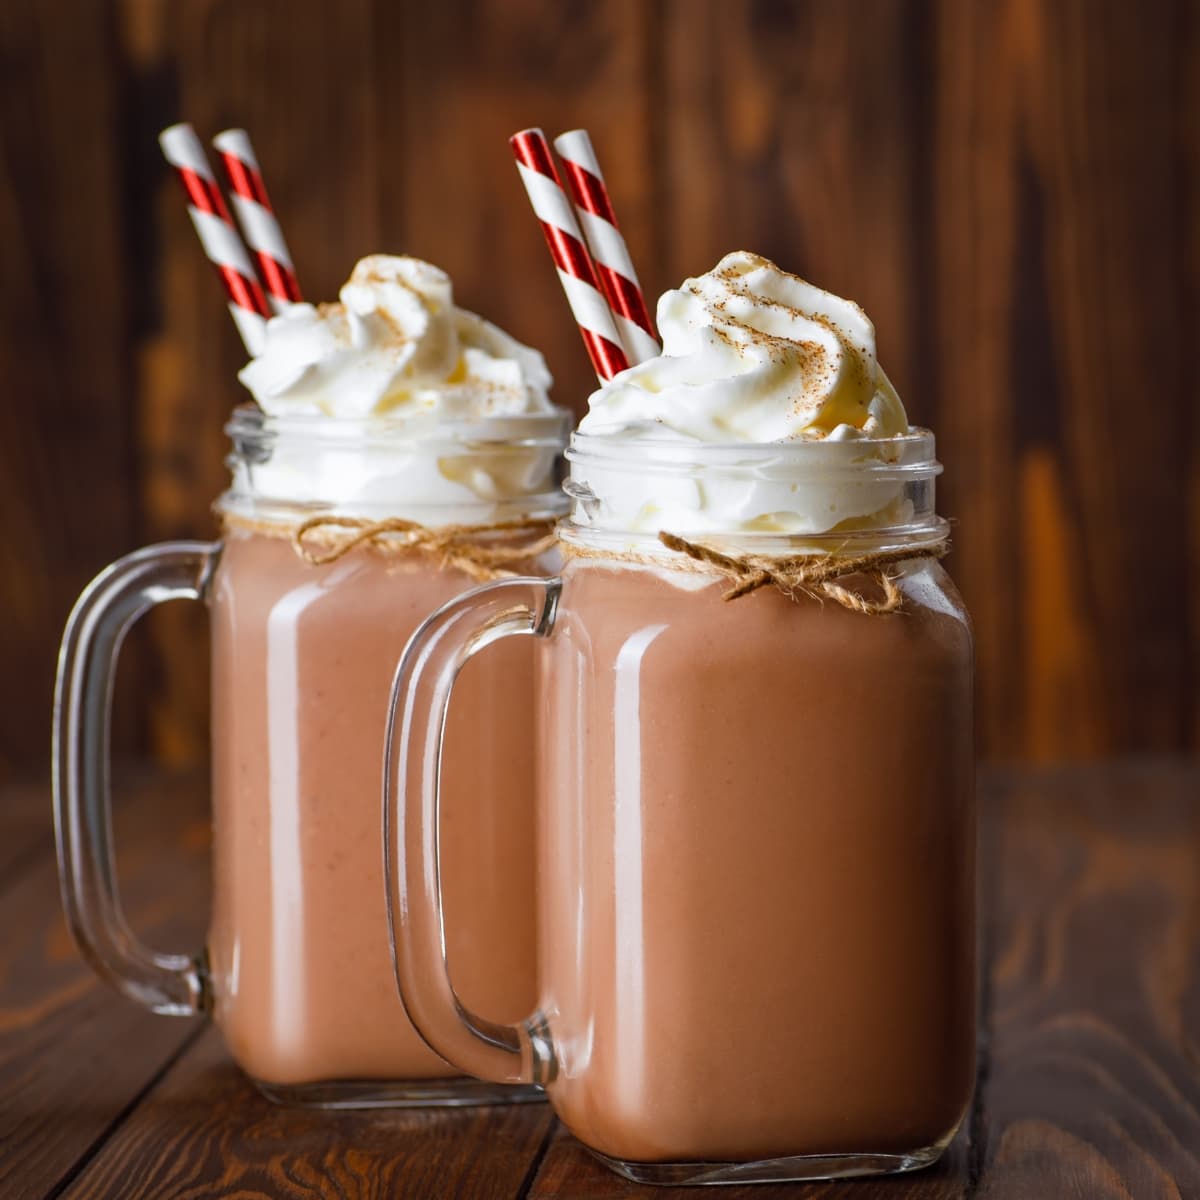 Two glasses of chocolate milkshake with straw topped with whipped cream.